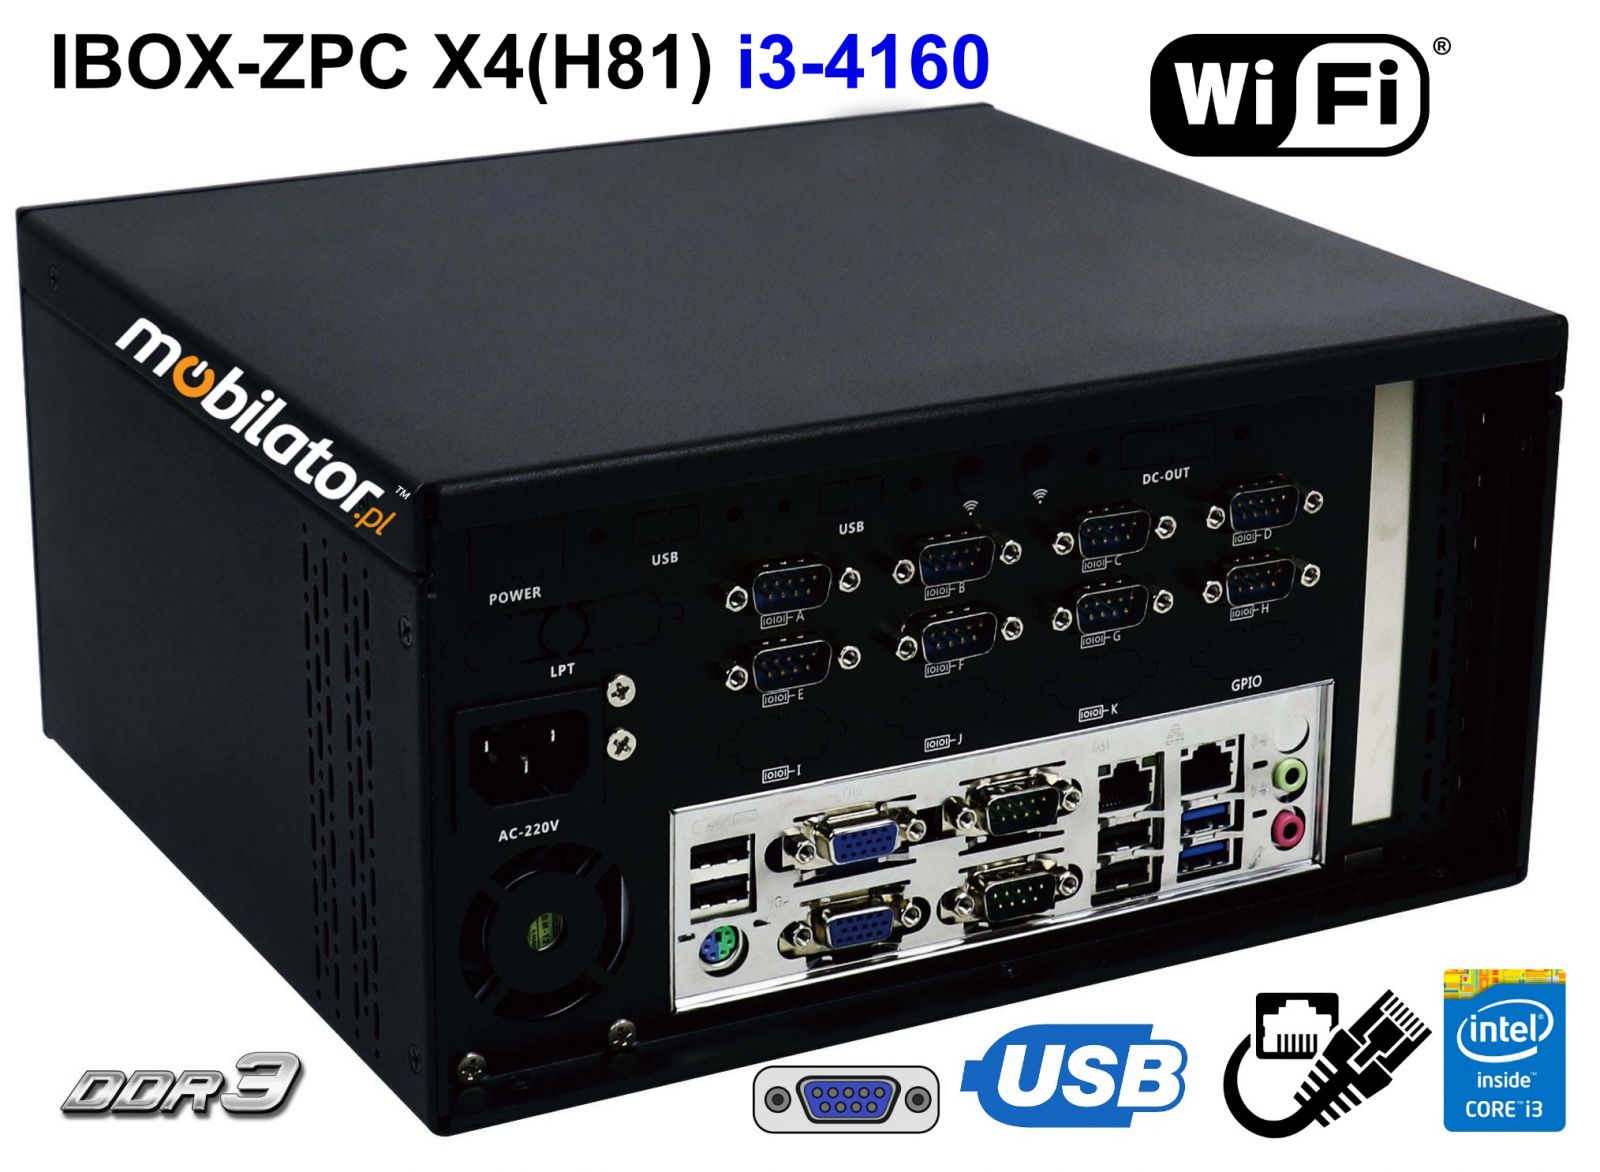 iBOX-ZPC X4 Industrial computer for warehouse applications with WiFi module 6x COM